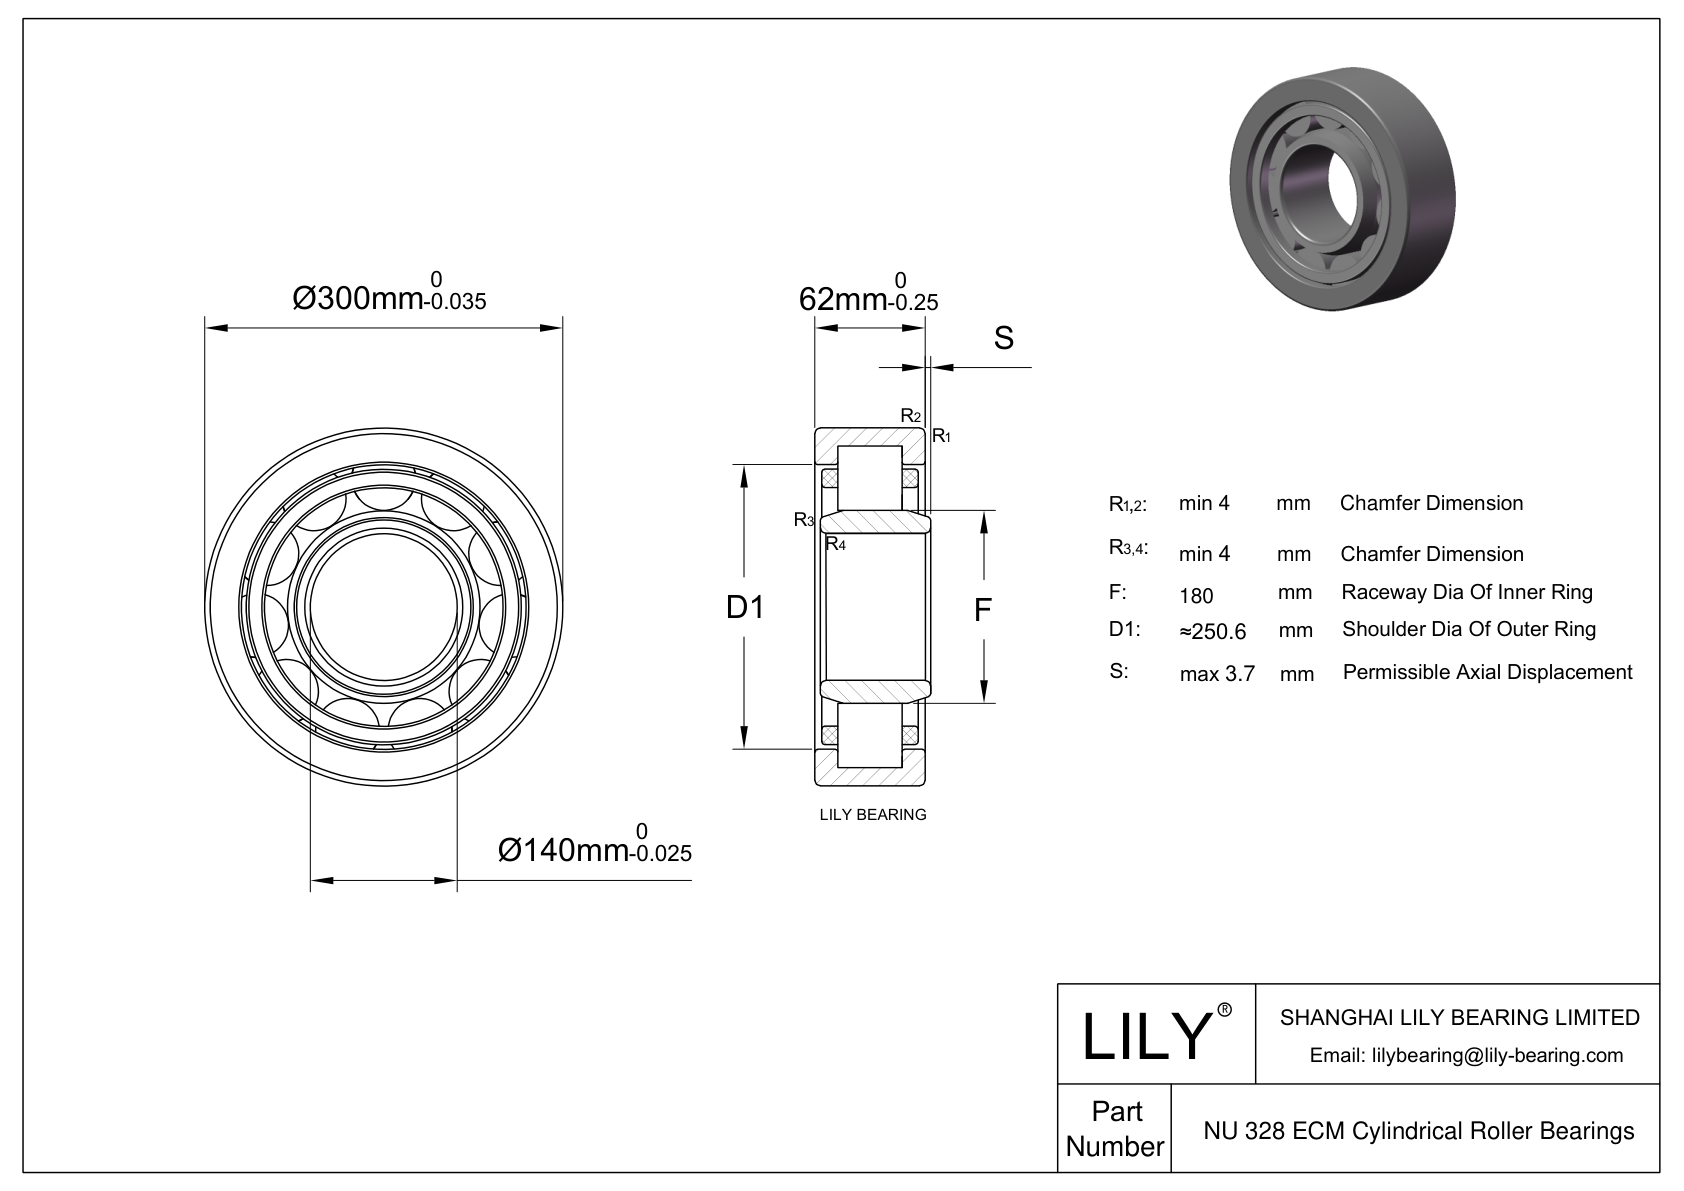 NU 328 ECM/C3VL2071 Ceramic Coated Cylindrical Roller Bearings cad drawing